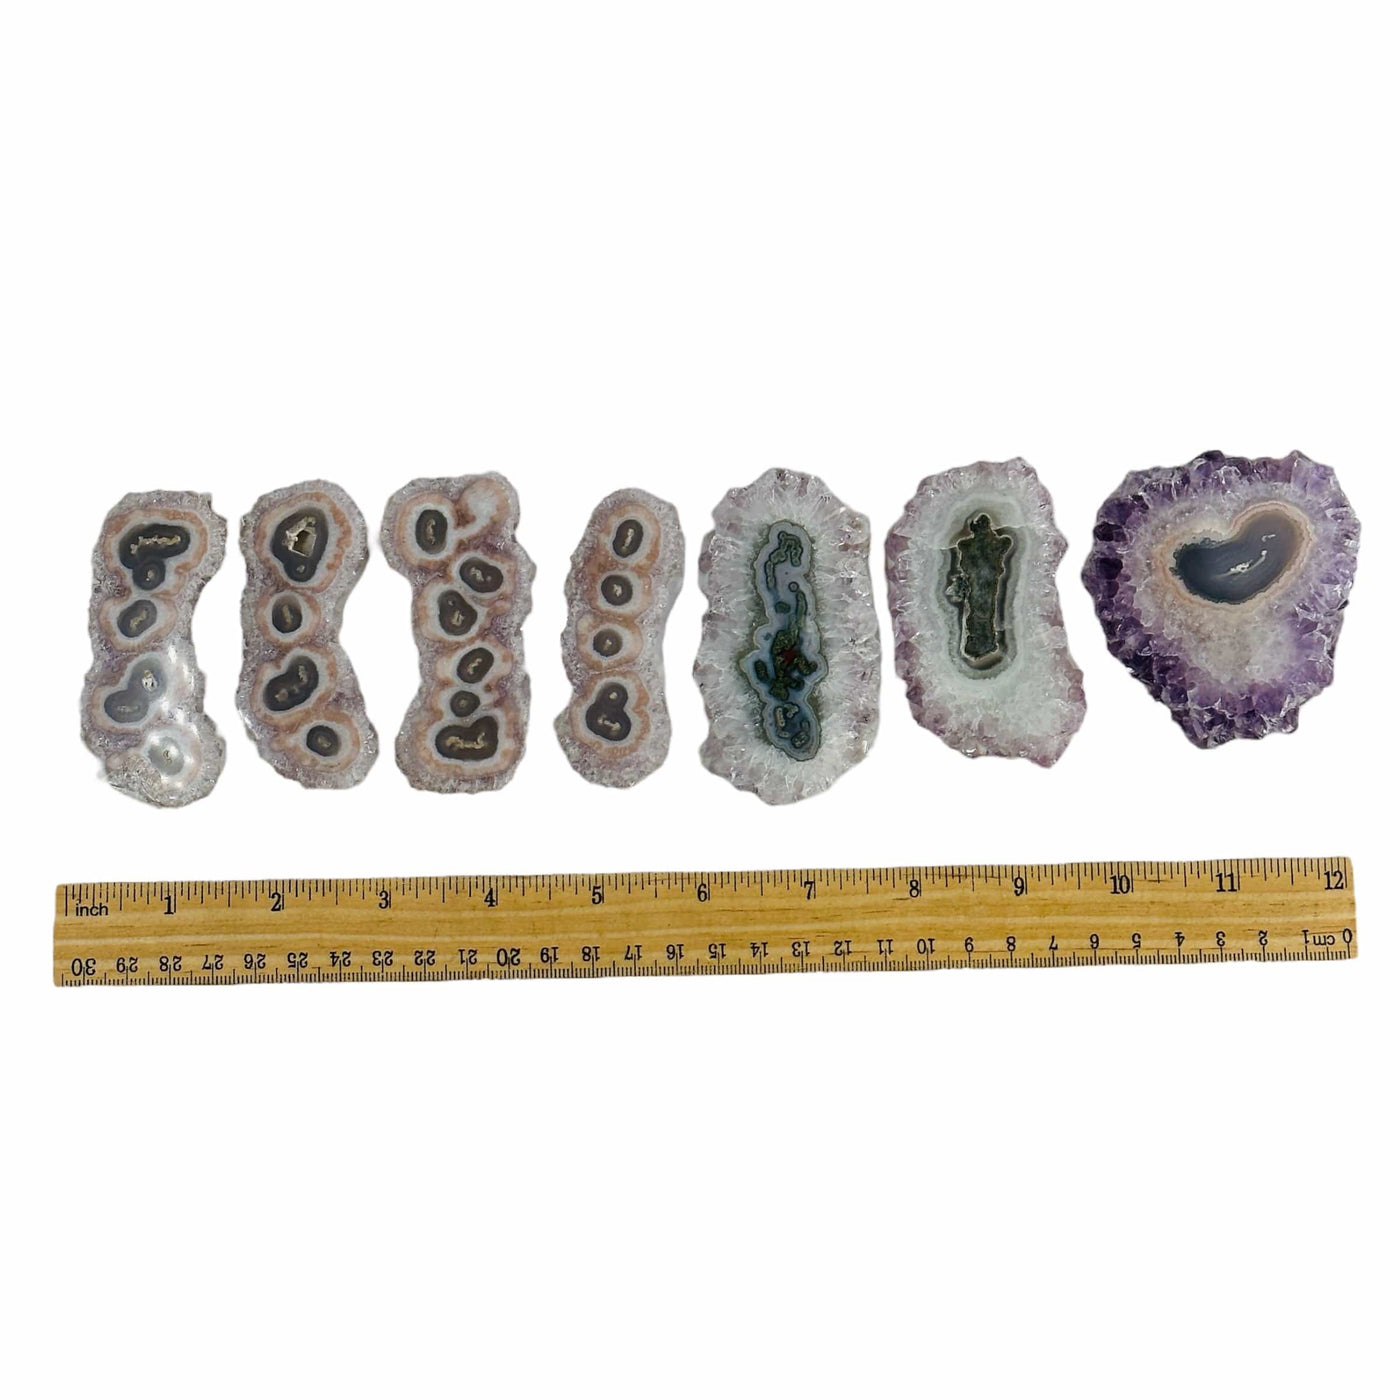 amethyst stalactites next to a ruler for size reference